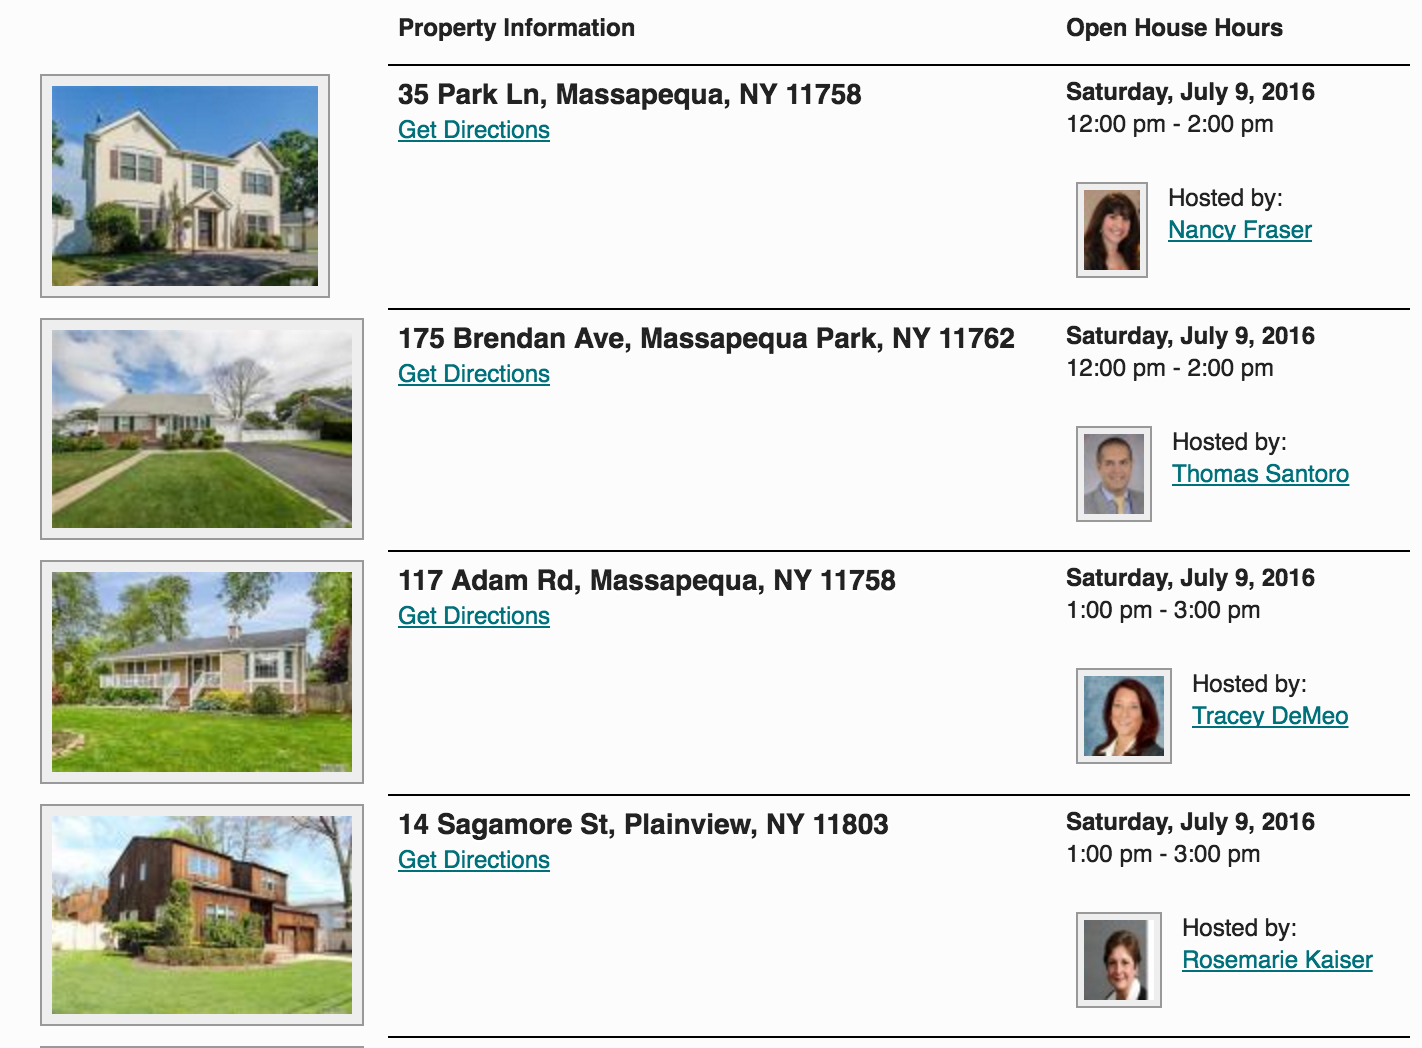 Open Houses This Weekend in Massapequa Park! 7/9 & 7/10